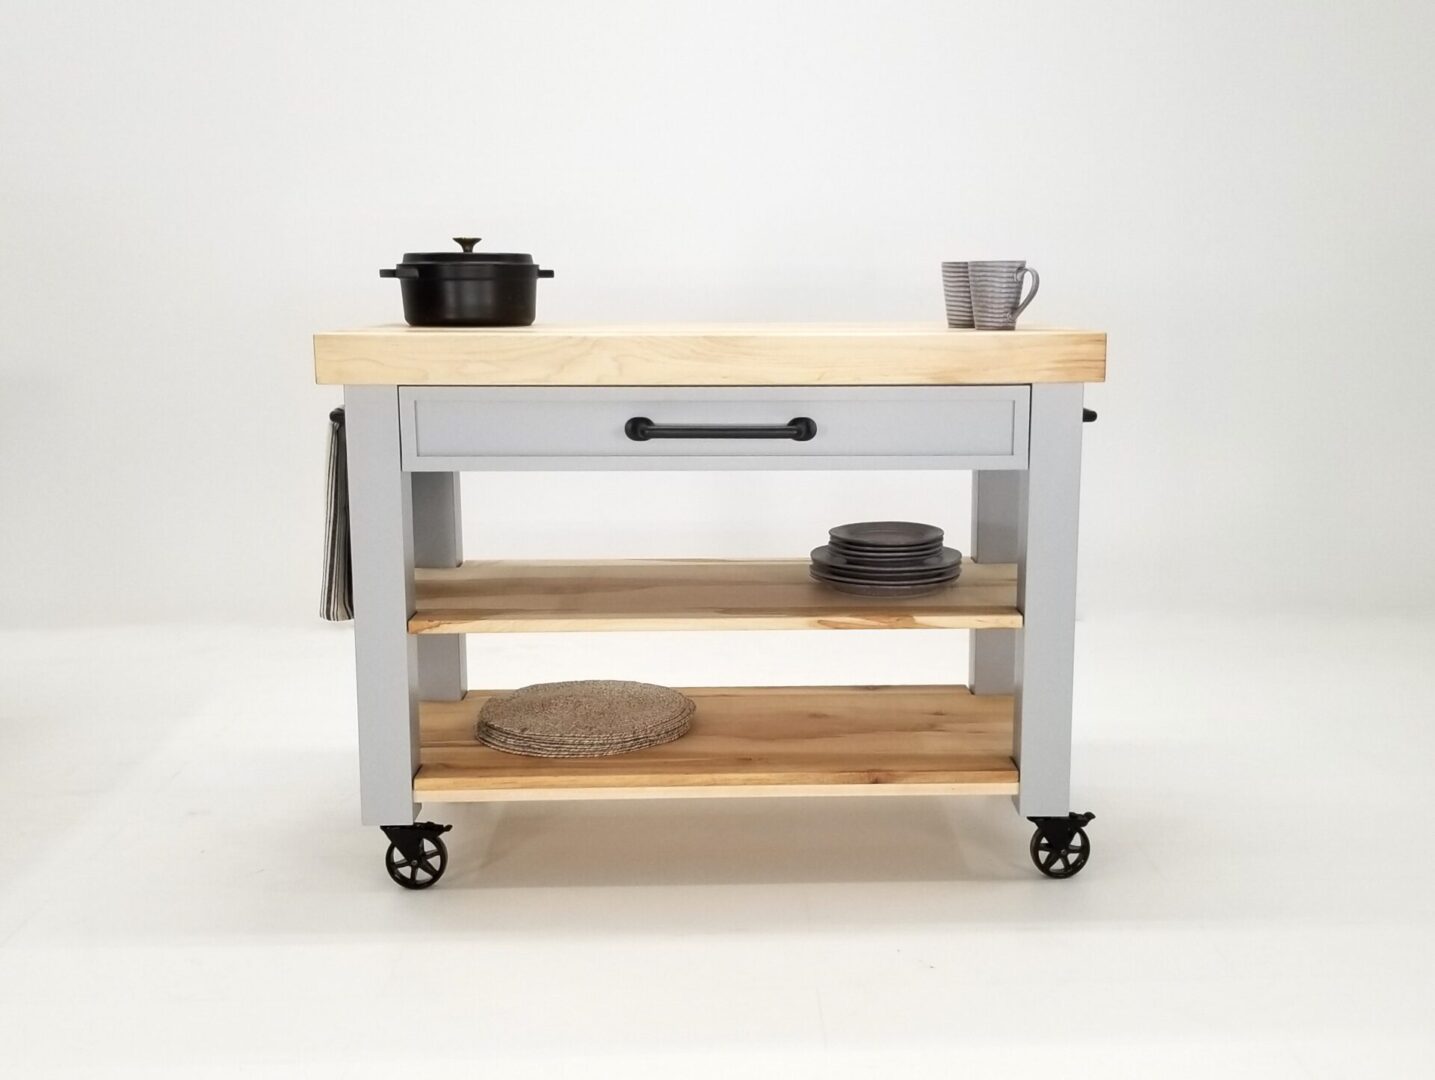 A CHEF Custom Maple Butcher Block Cart on wheels with a pot on top.